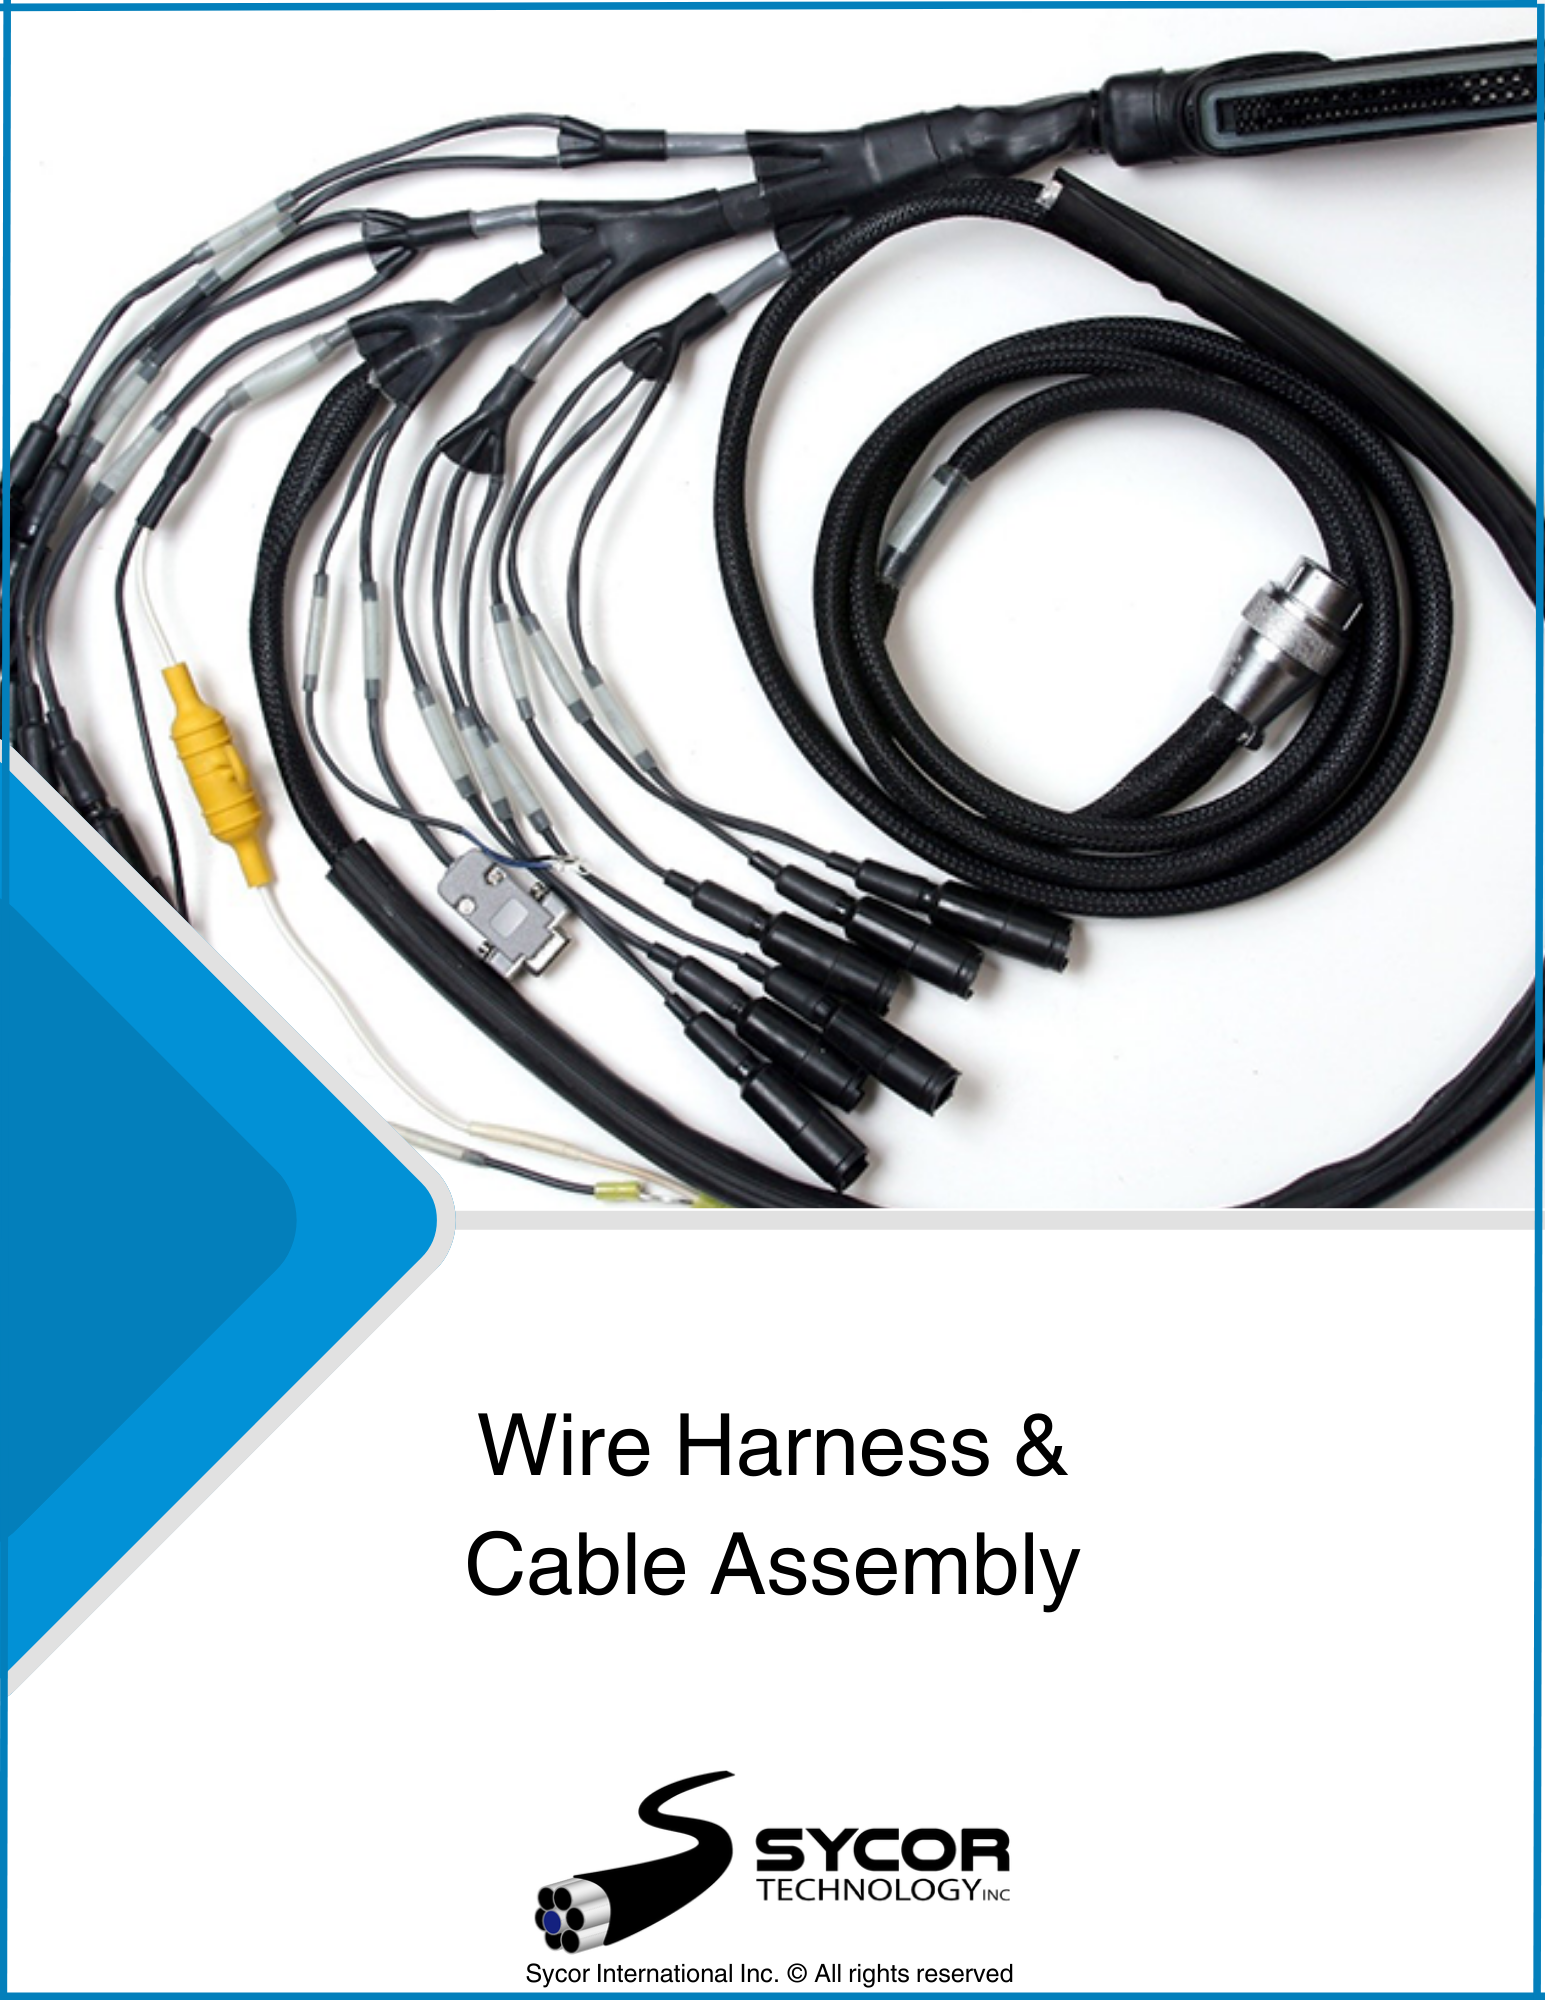 Sycor's Cable Assembly / Wire Harness brochure